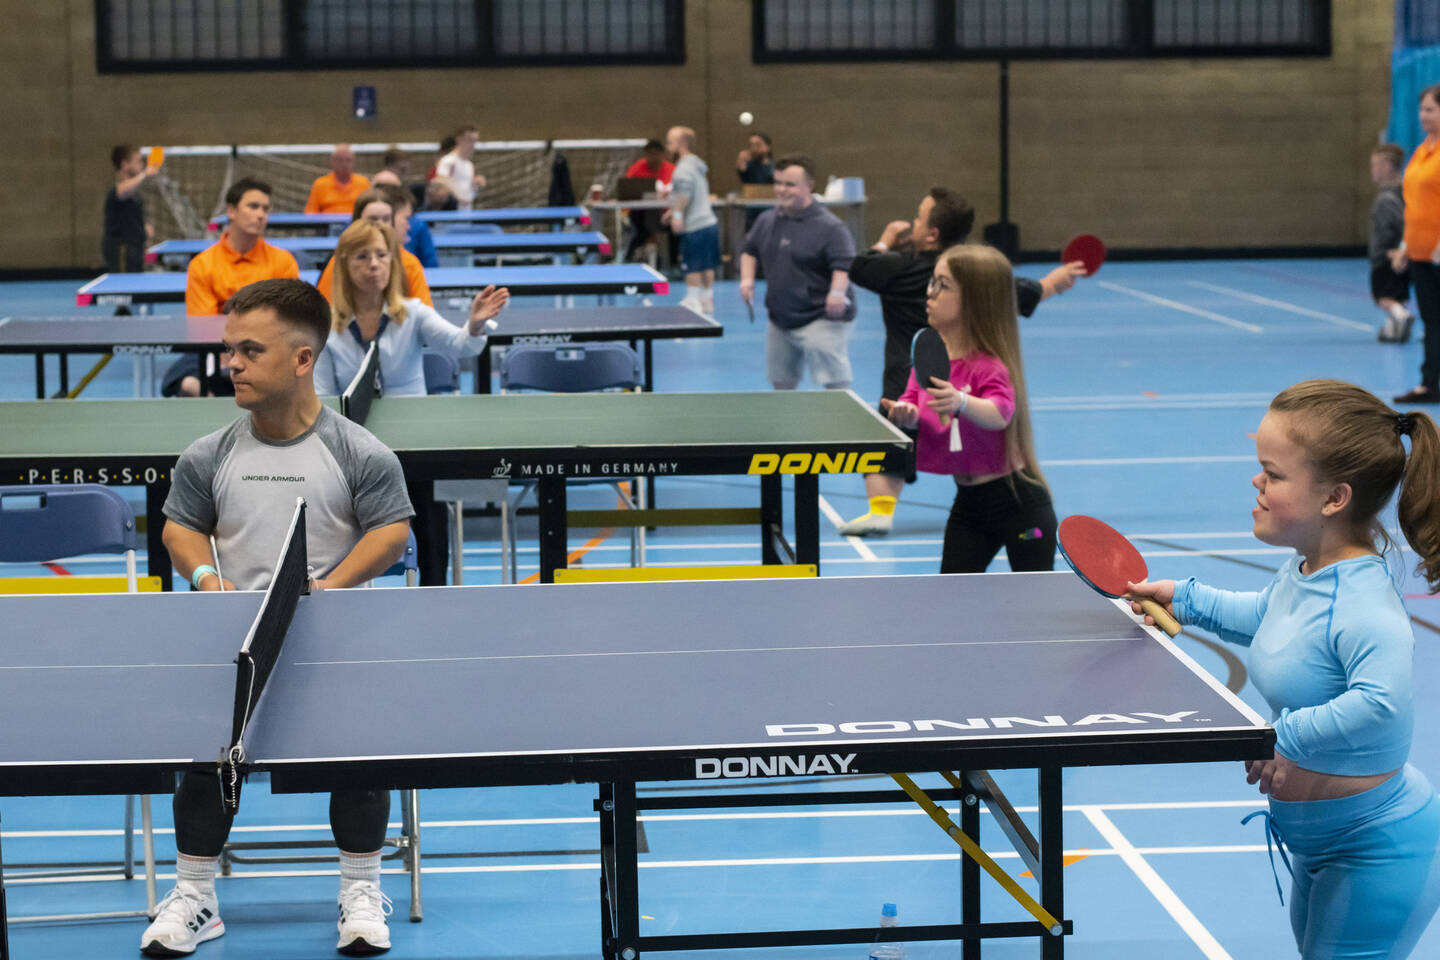 People playing table tennis at National Dwarf Games